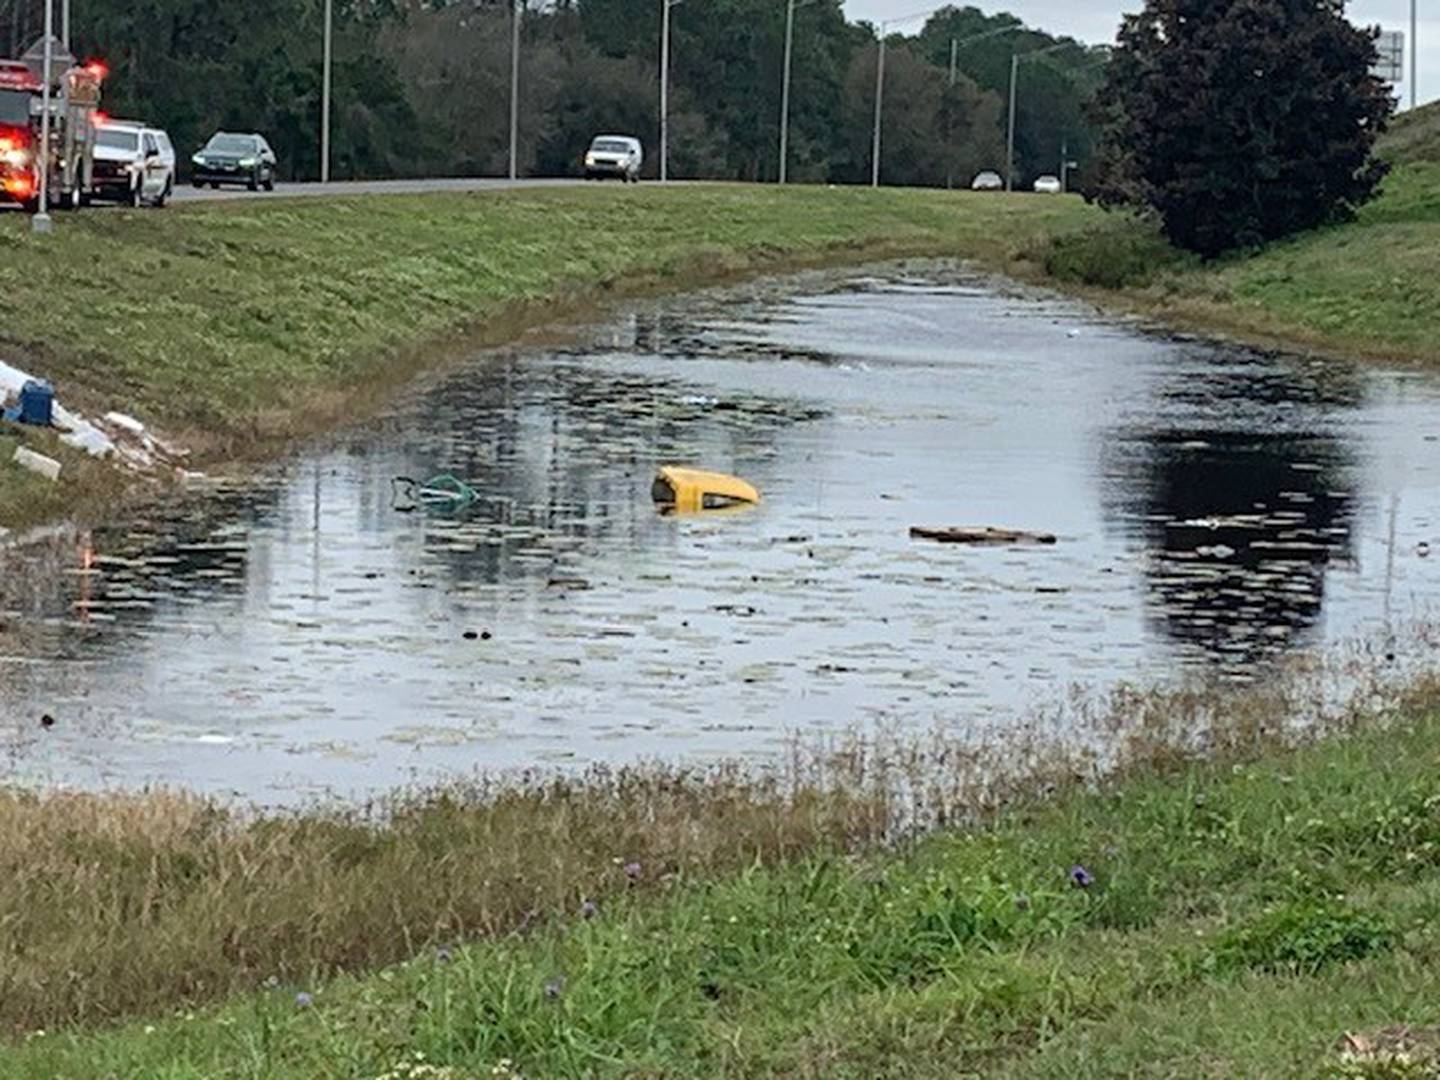 JFRD said a truck entered a retention pond on I-295 north at the St. John's Bluff exit.